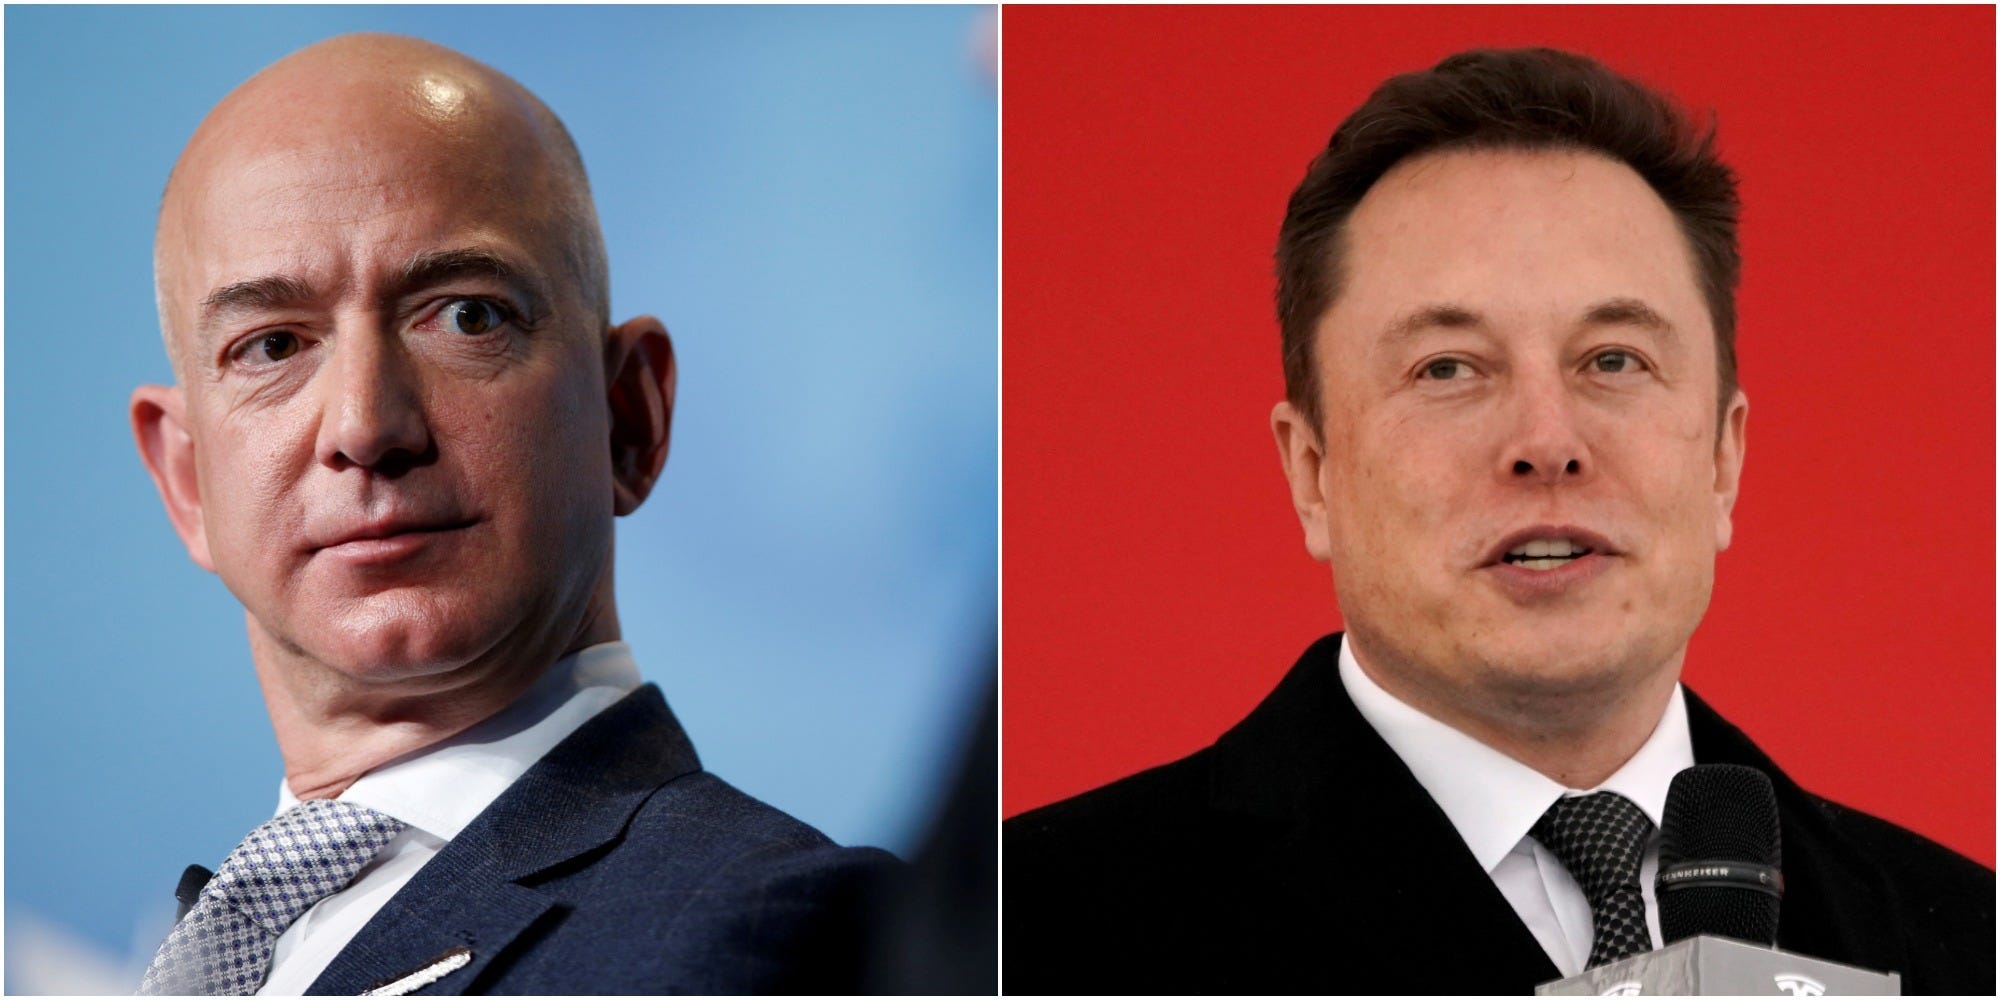 While CEOs across America decry the rampage in Washington, Jeff Bezos is silent and Elon Musk is posting memes